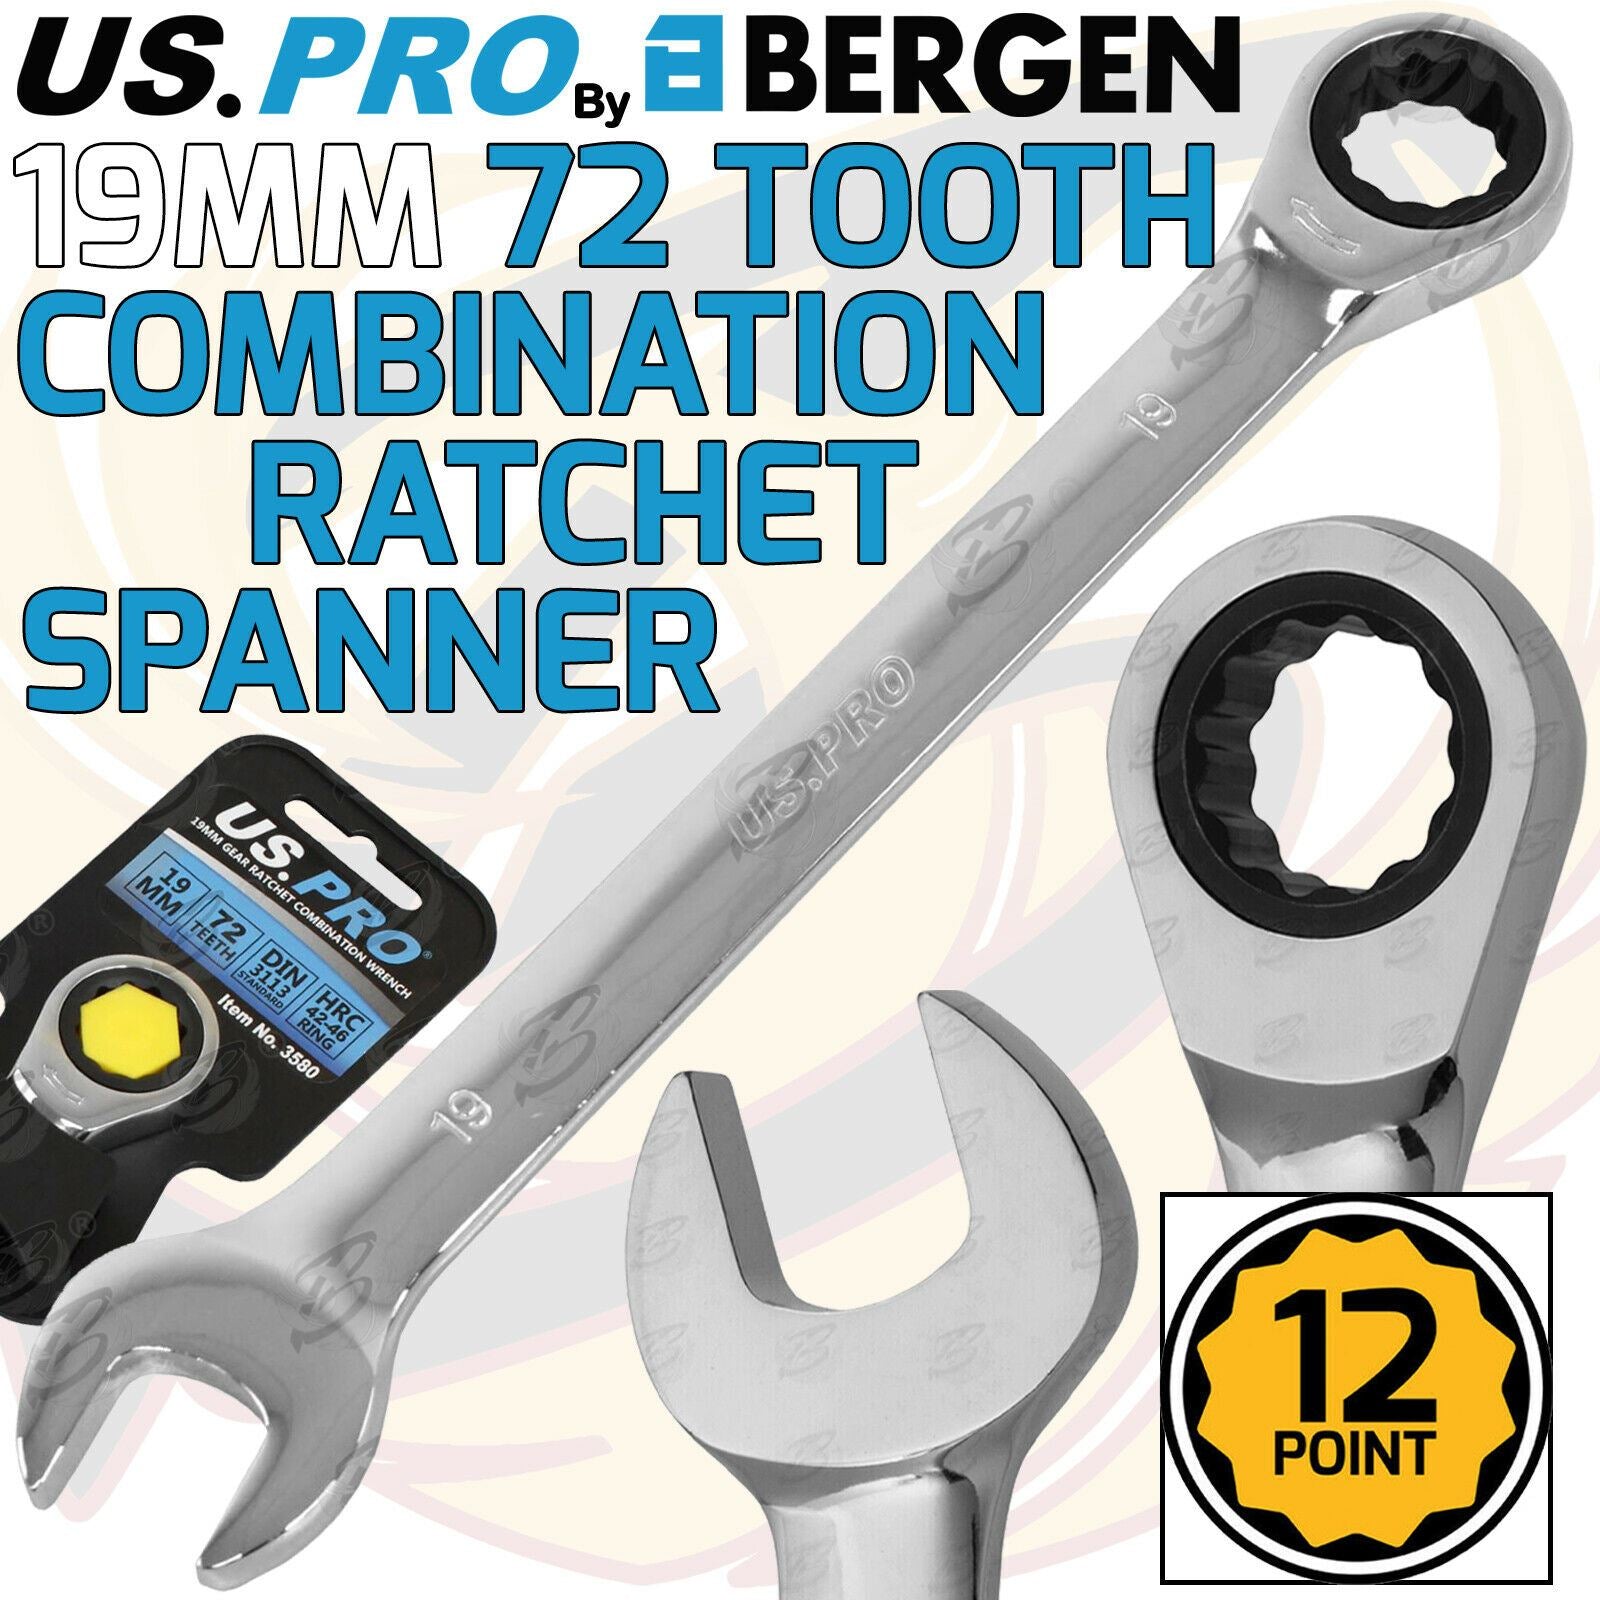 US PRO 19MM 72 TOOTH RATCHET SPANNER